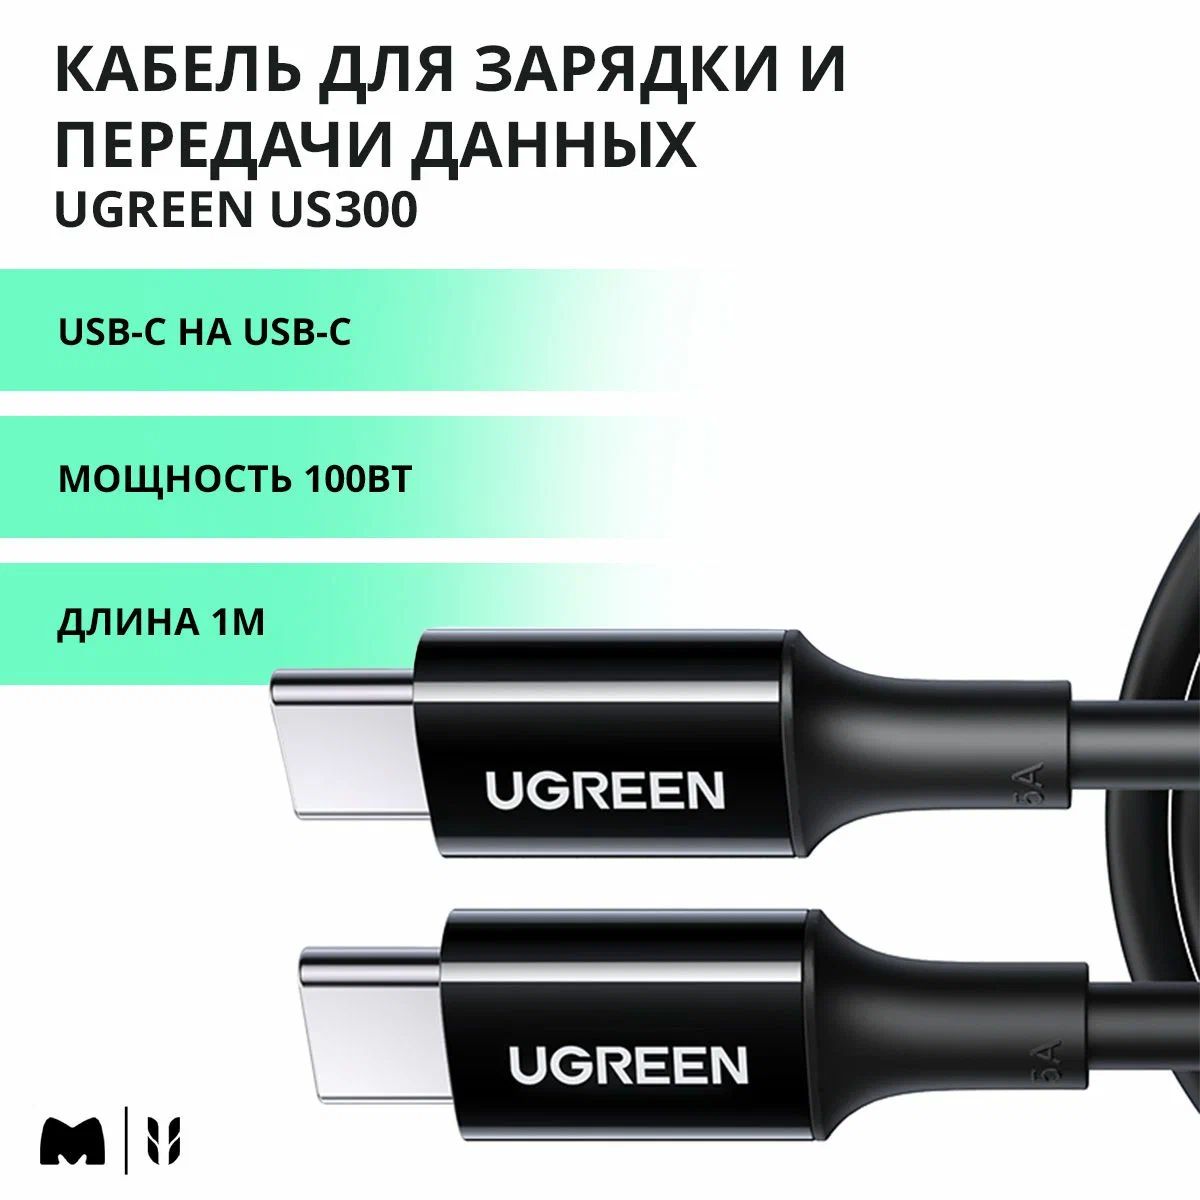 Кабель UGREEN Type-C Male to Type-C Male 2.0 ABS Shell 5A Current, длина 1м, цвет черный (80371) кабель ugreen us300 80370 type c male to type c male 2 0 abs shell 5a current 1 5м белый